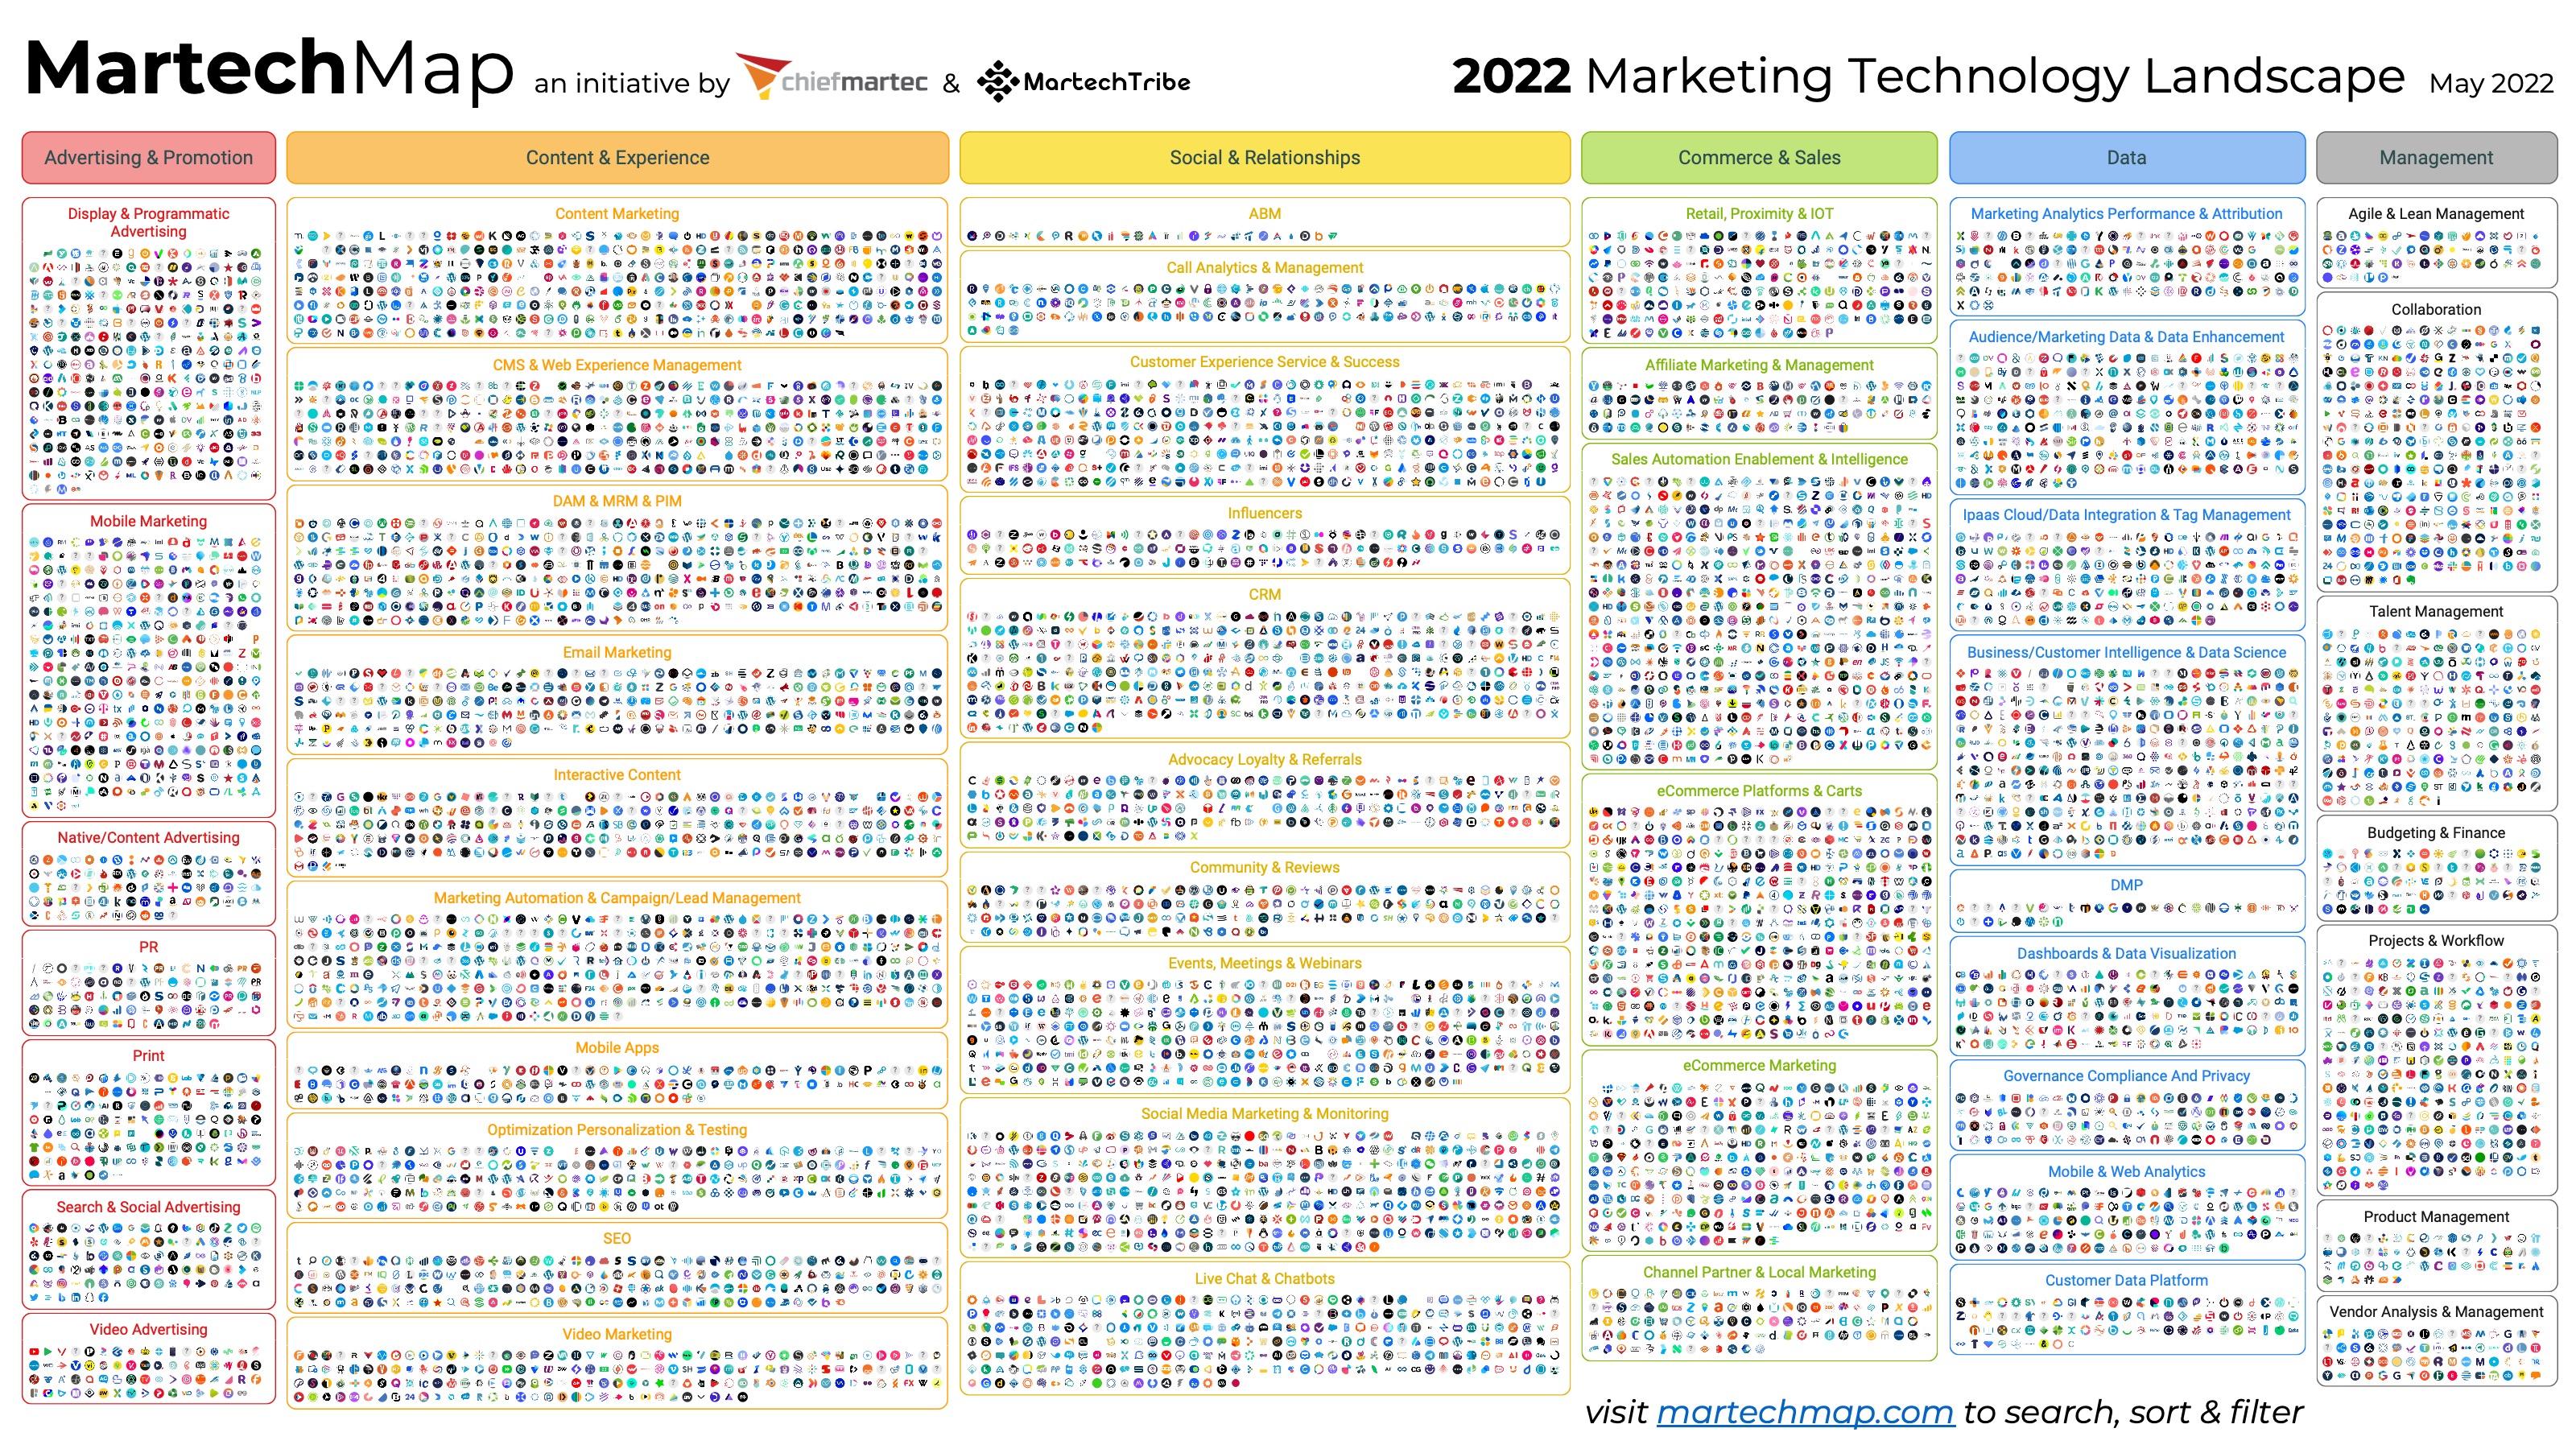 Sites For Below 20 Mb Porn Videos - Marketing Technology Landscape 2022: search 9,932 solutions on martechmap. com - Chief Marketing Technologist